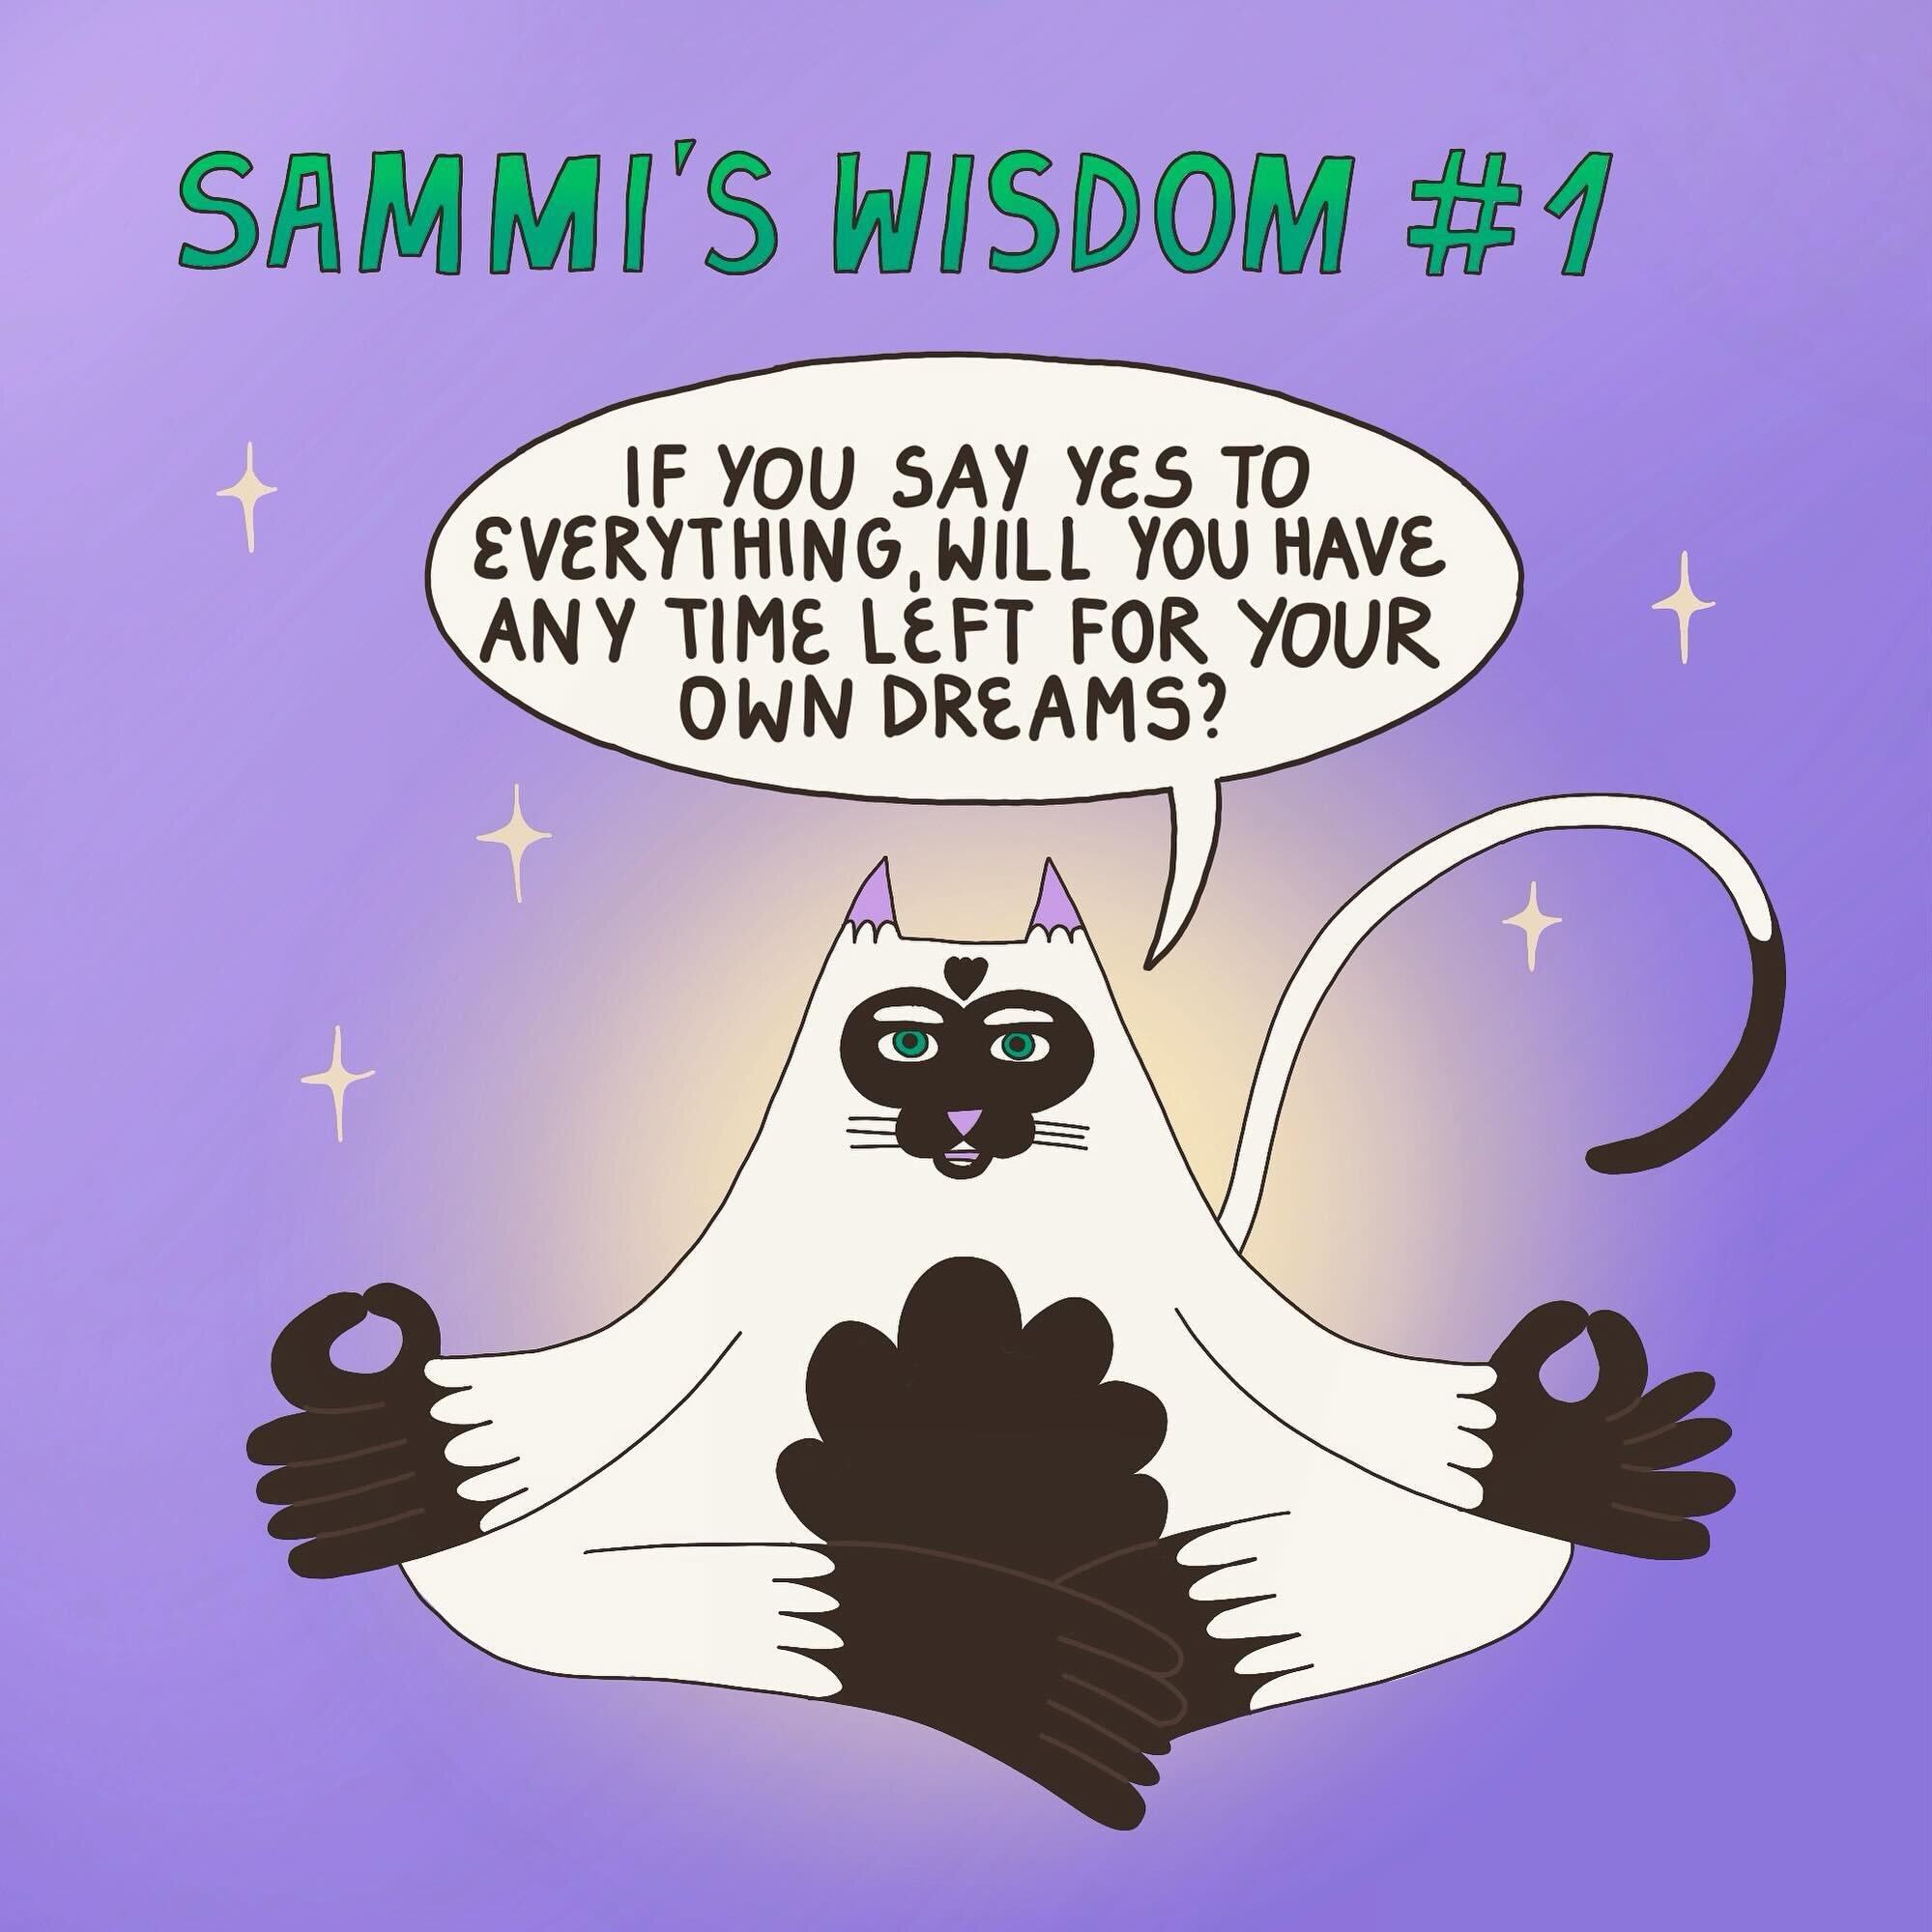 Sammi is a Siamese sage cat, who reached enlightenment during his castration. 

May his wisdom help you navigate your human journey. 🧘🏻&zwj;♀️ 

#buddhism #buddhist #buddhistcat #siamesecat #buddhistwisdom #buddhistquestion #wisecat #sammithesage #